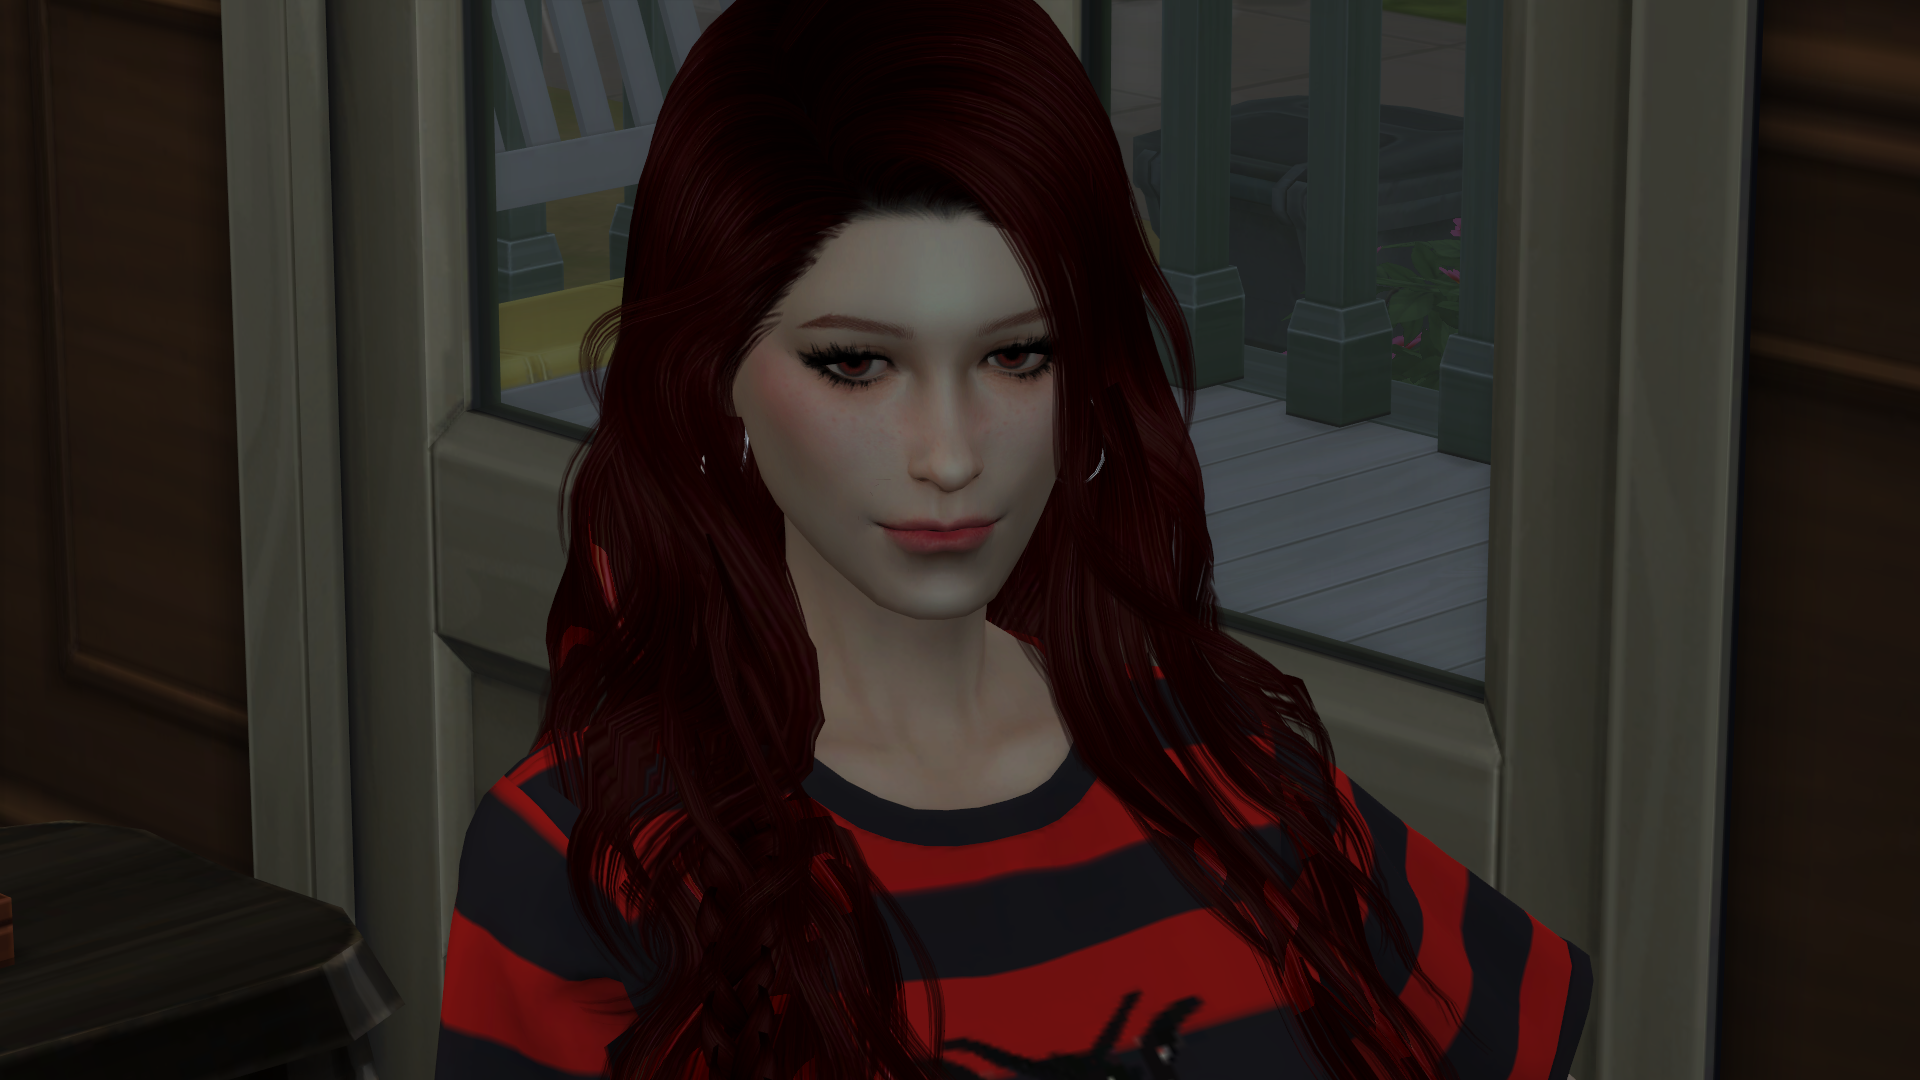 1016663884_TheSims41_16_202112_20_43AM.png.ecd0261be50e2ee3228934d31aacadbb.png